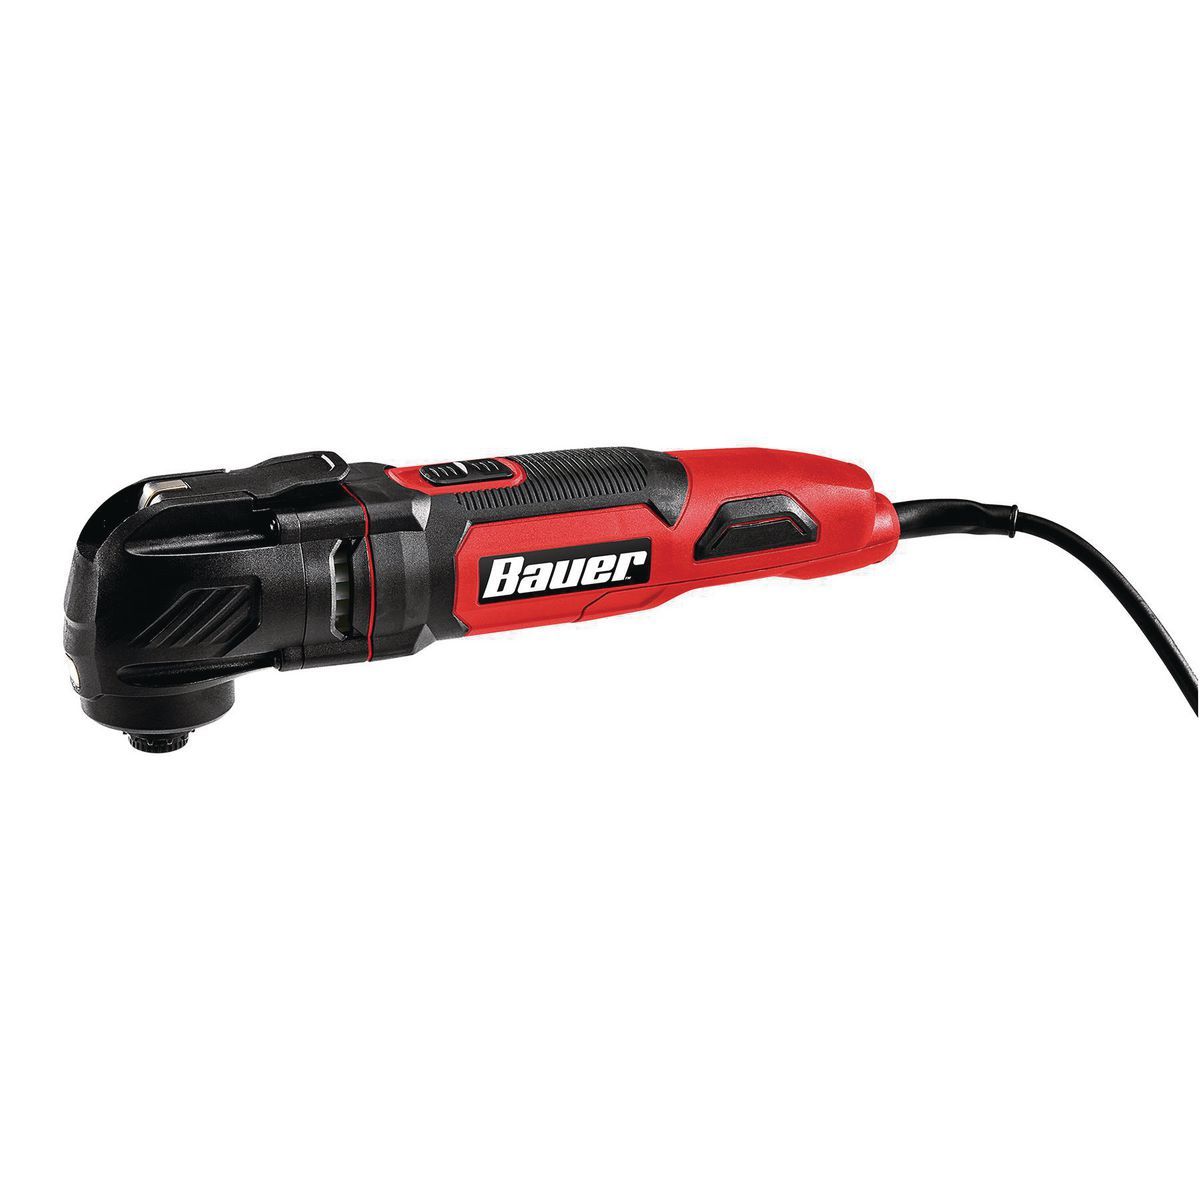 BAUER 3 Amp Variable Speed Oscillating Multi-Tool